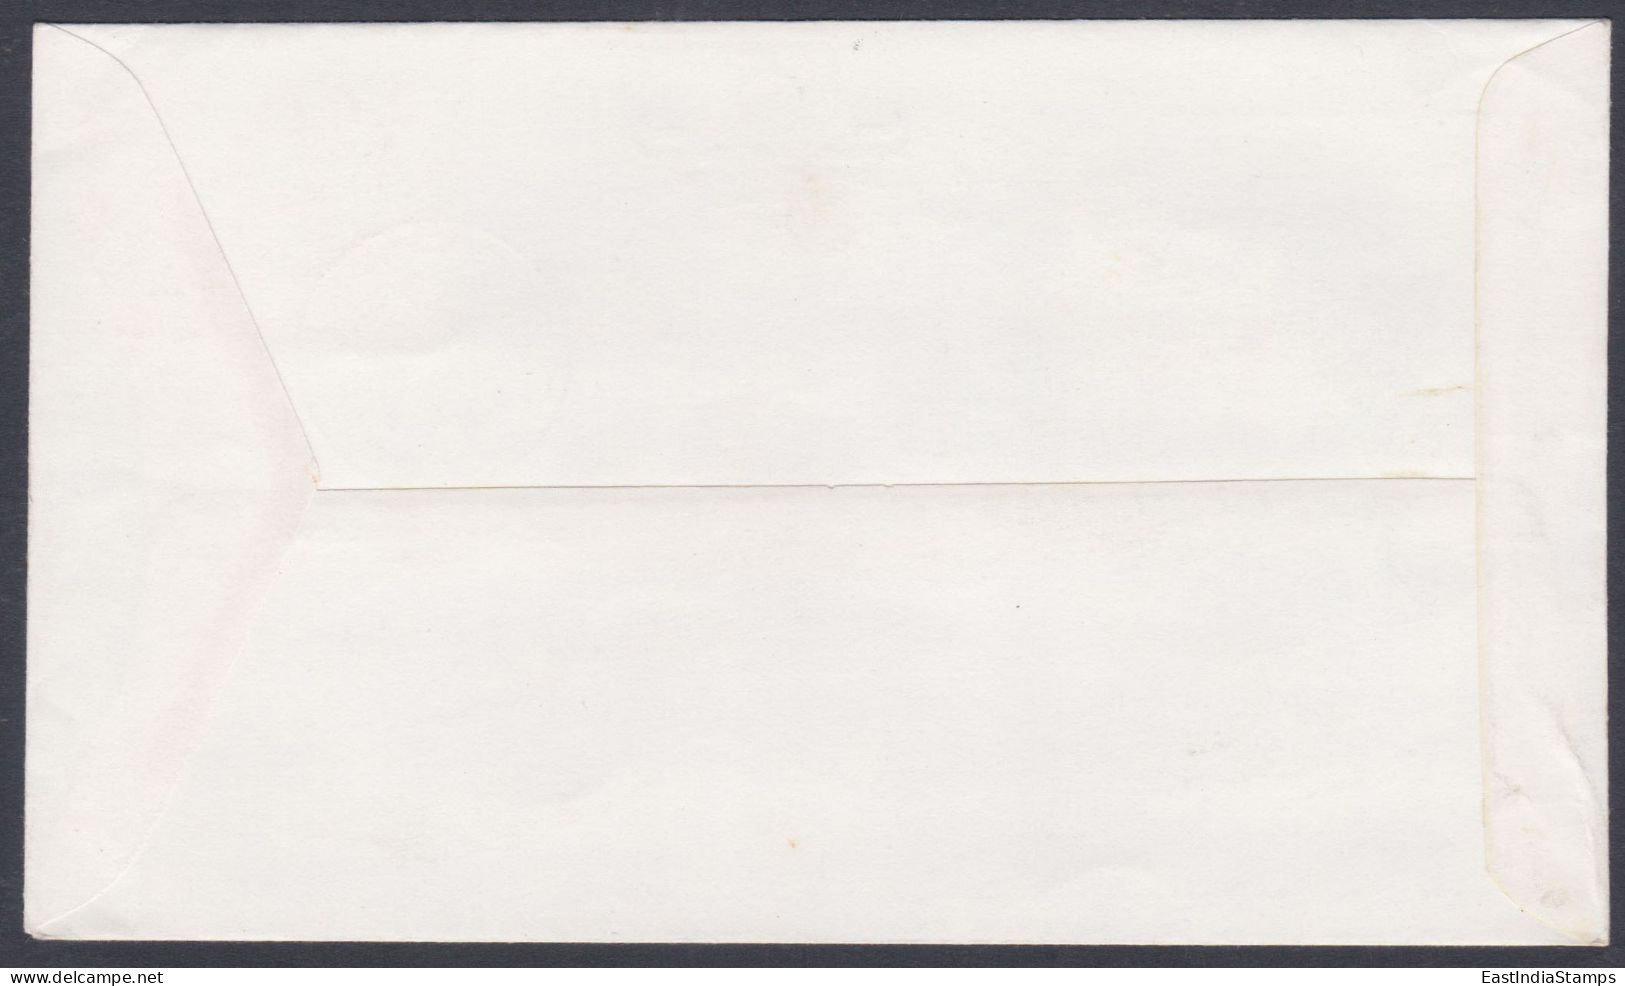 Inde India 1998 Special Cover Social Development Fair, Family, Man Woman, Child, Pictorial Postmark - Briefe U. Dokumente